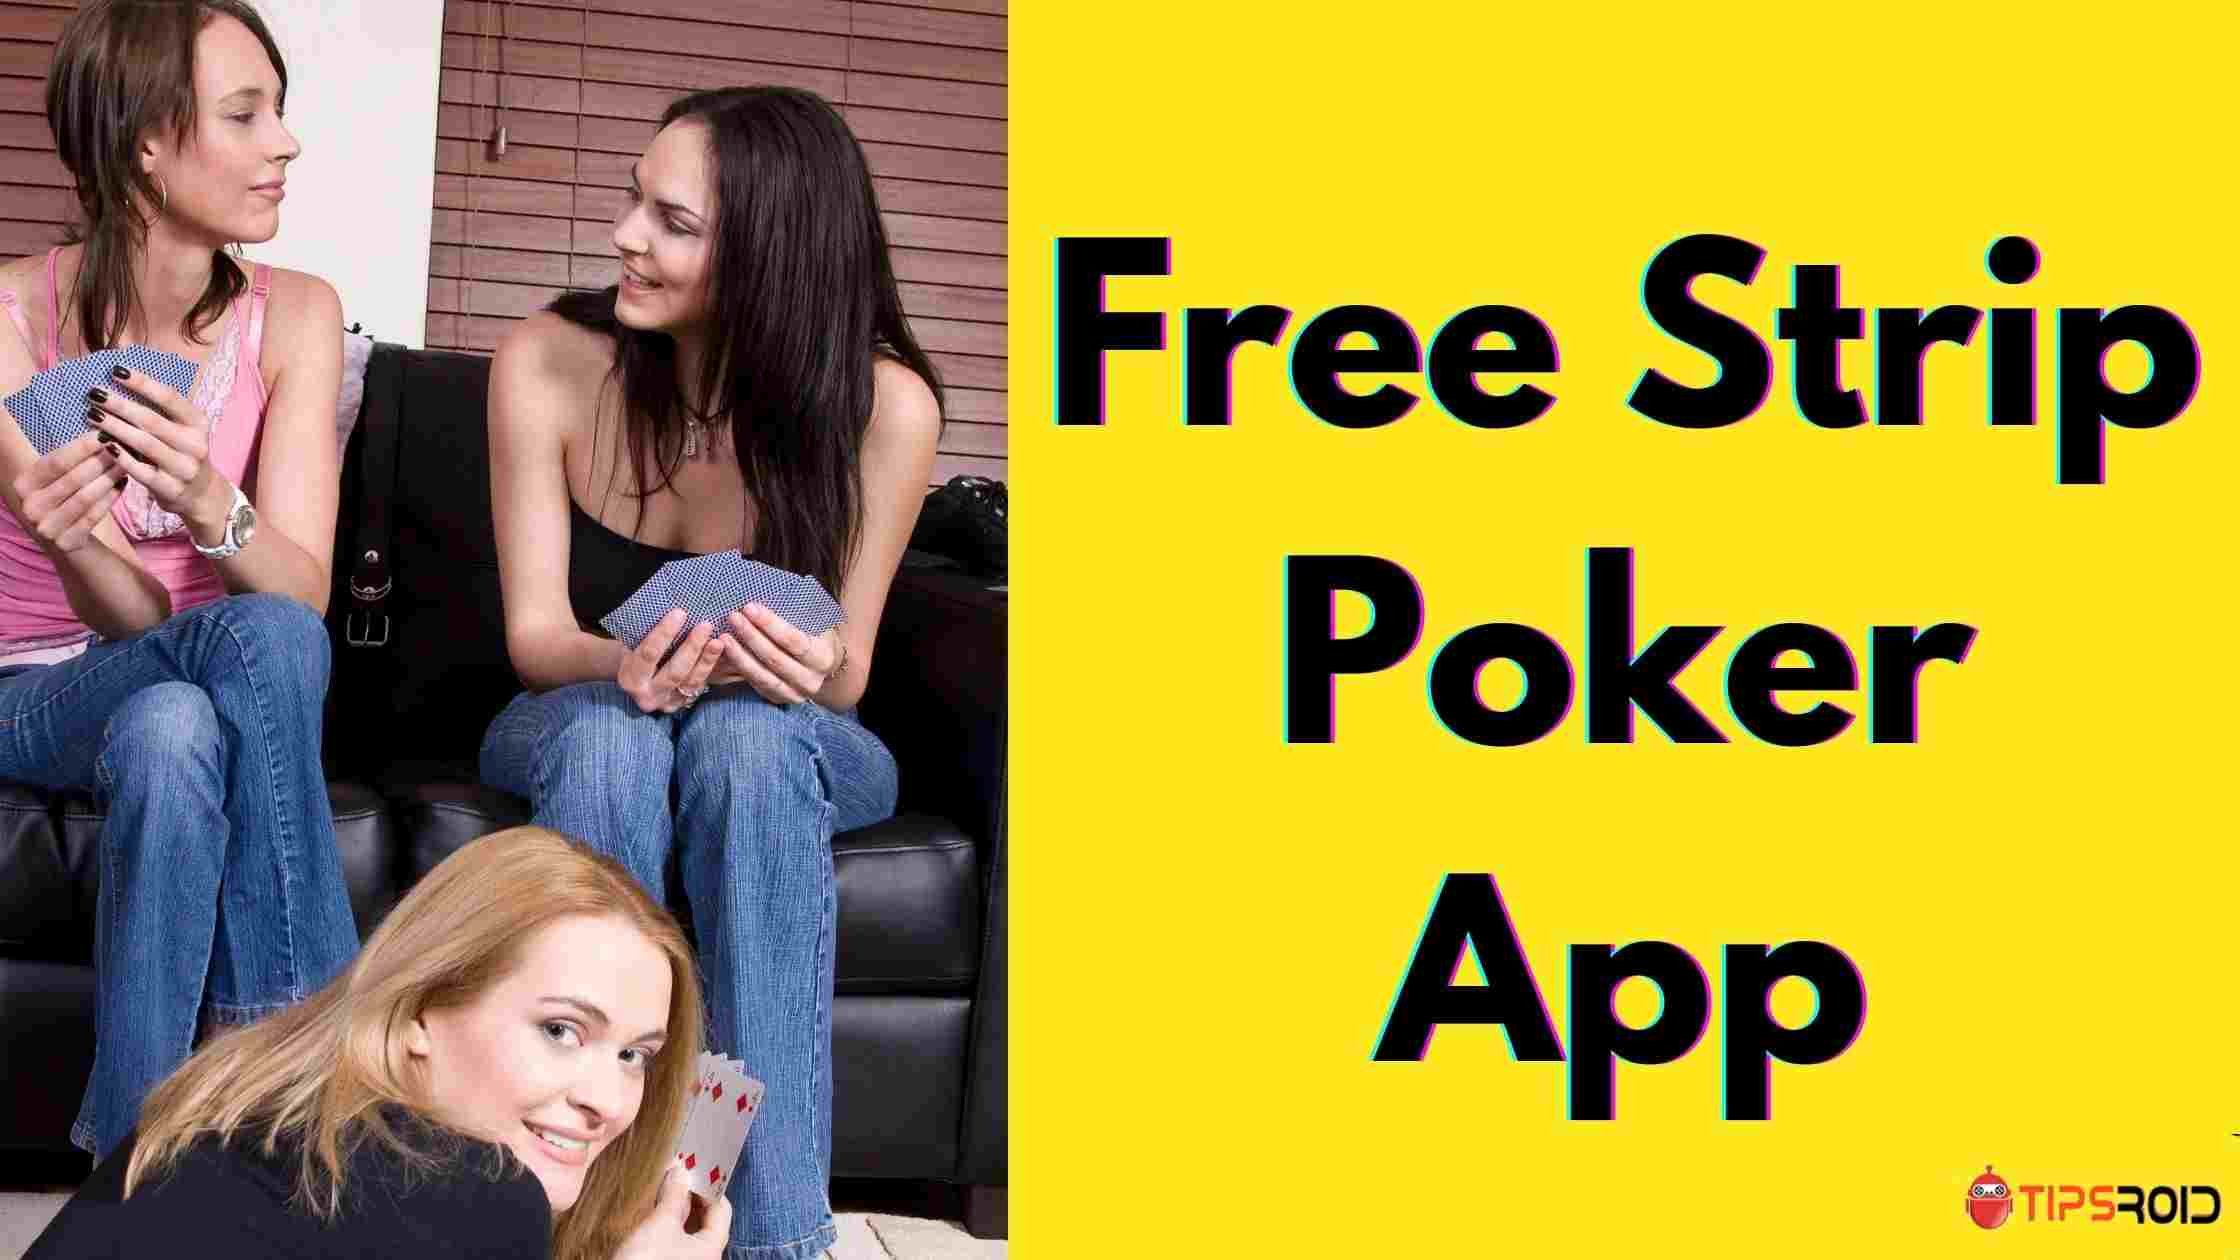 10 Best Free Strip Poker App For Android and iPhone